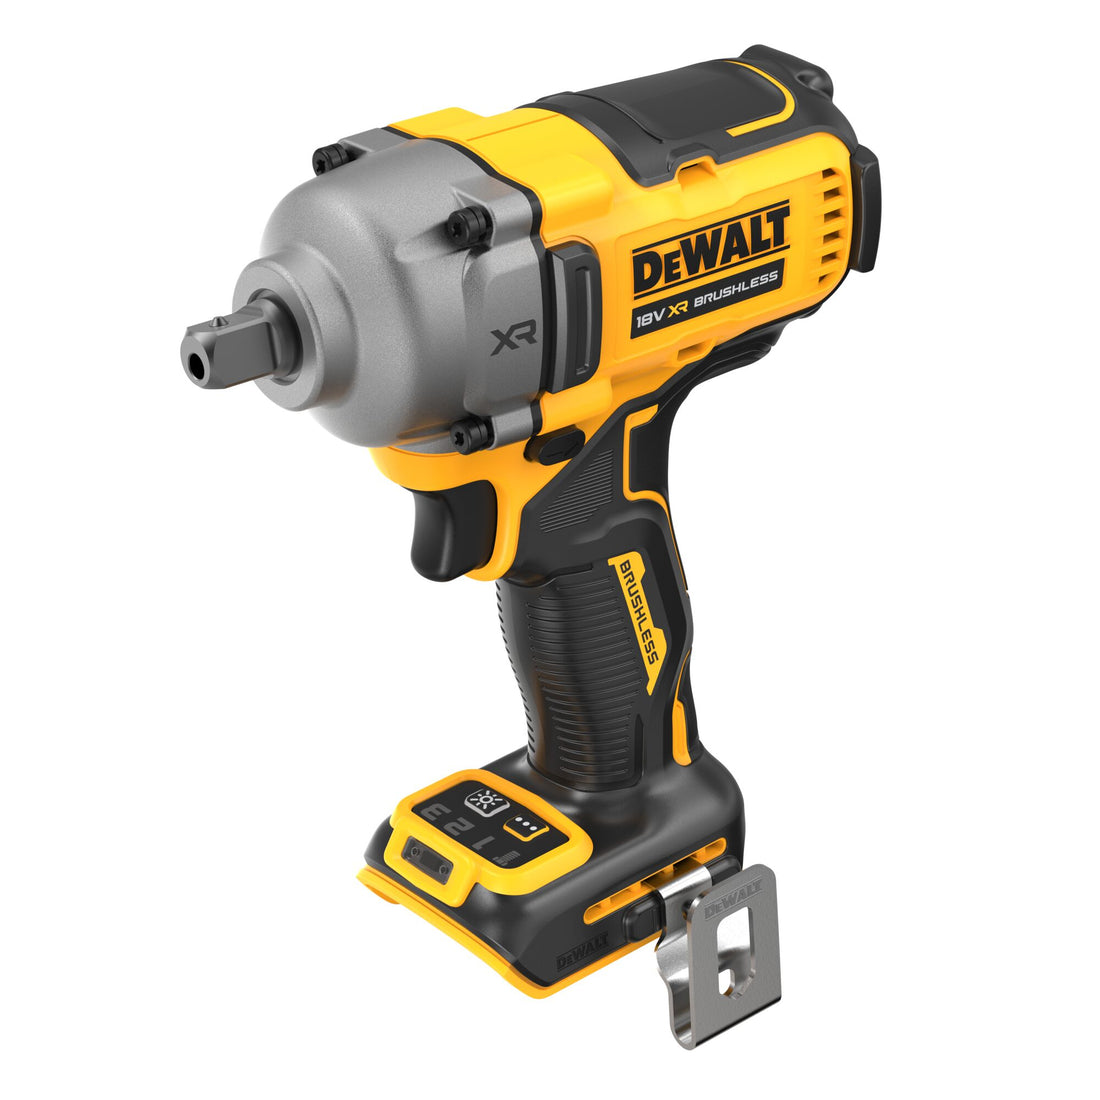 DEWALT 20V 3-SPEED BRUSHLESS IMPACT DRILL WITHOUT BATTERY AND CHARGER